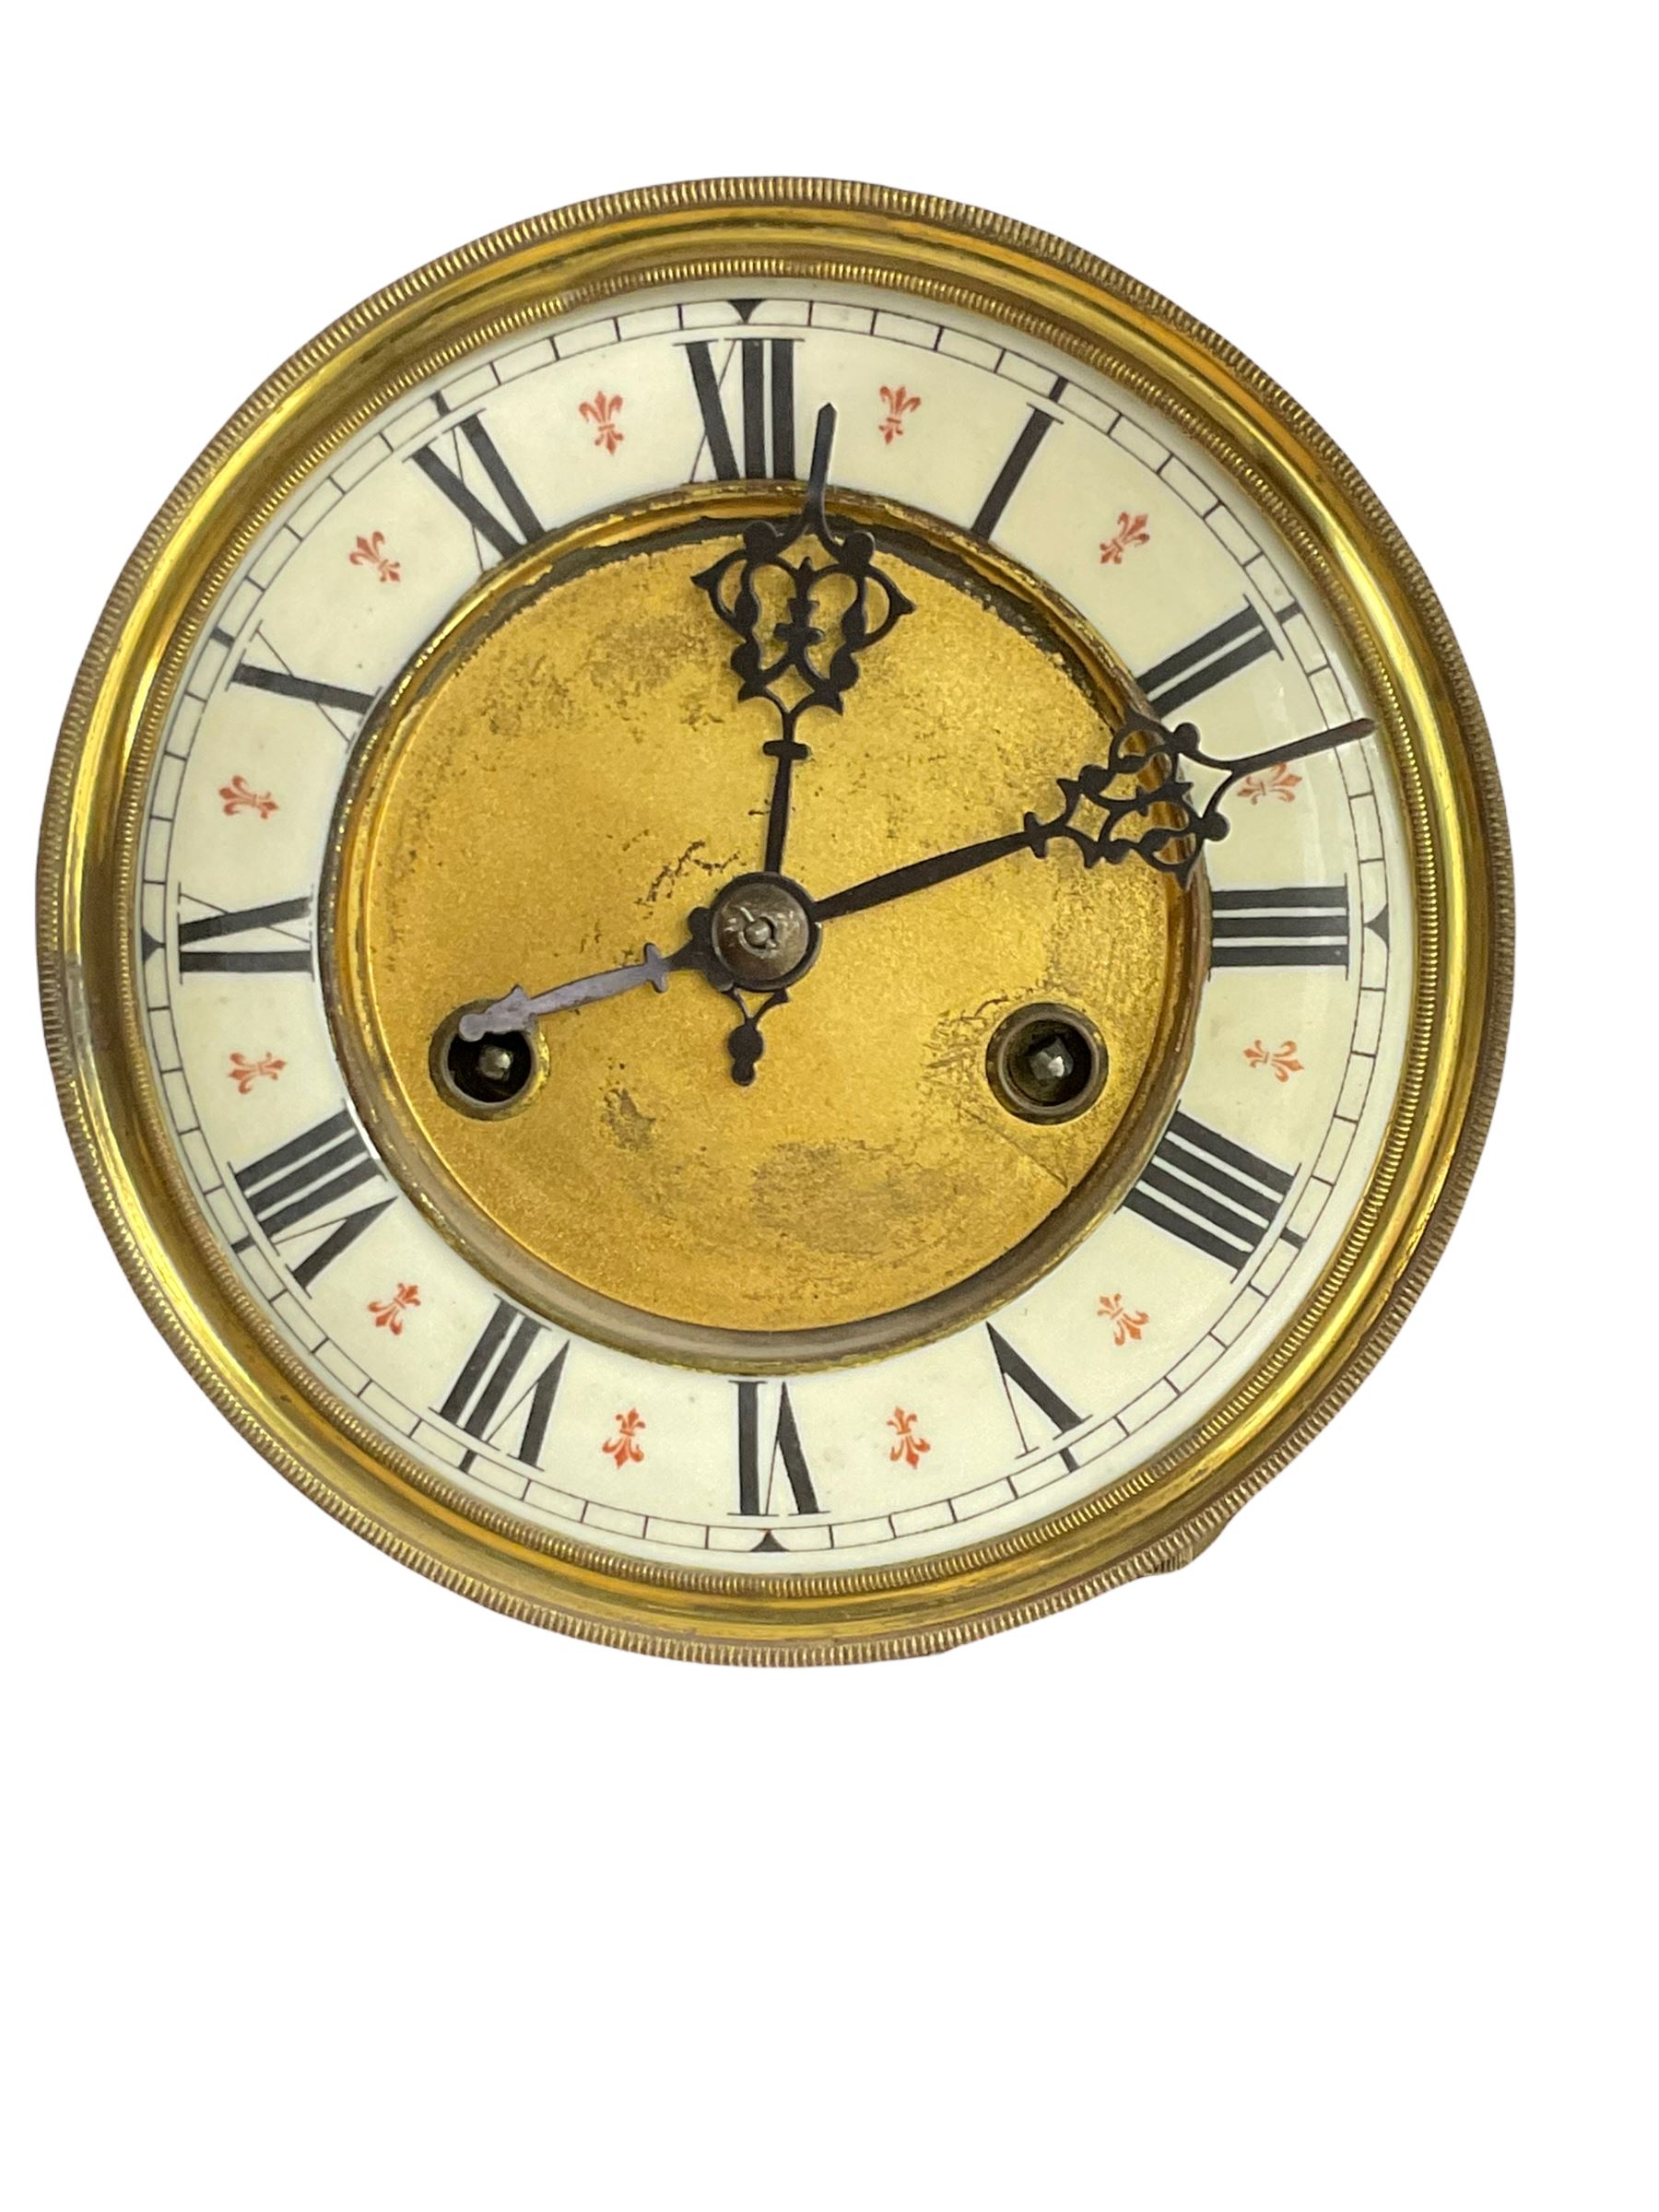 A late 19th century German spring driven wall clock in a mahogany case - Image 3 of 3